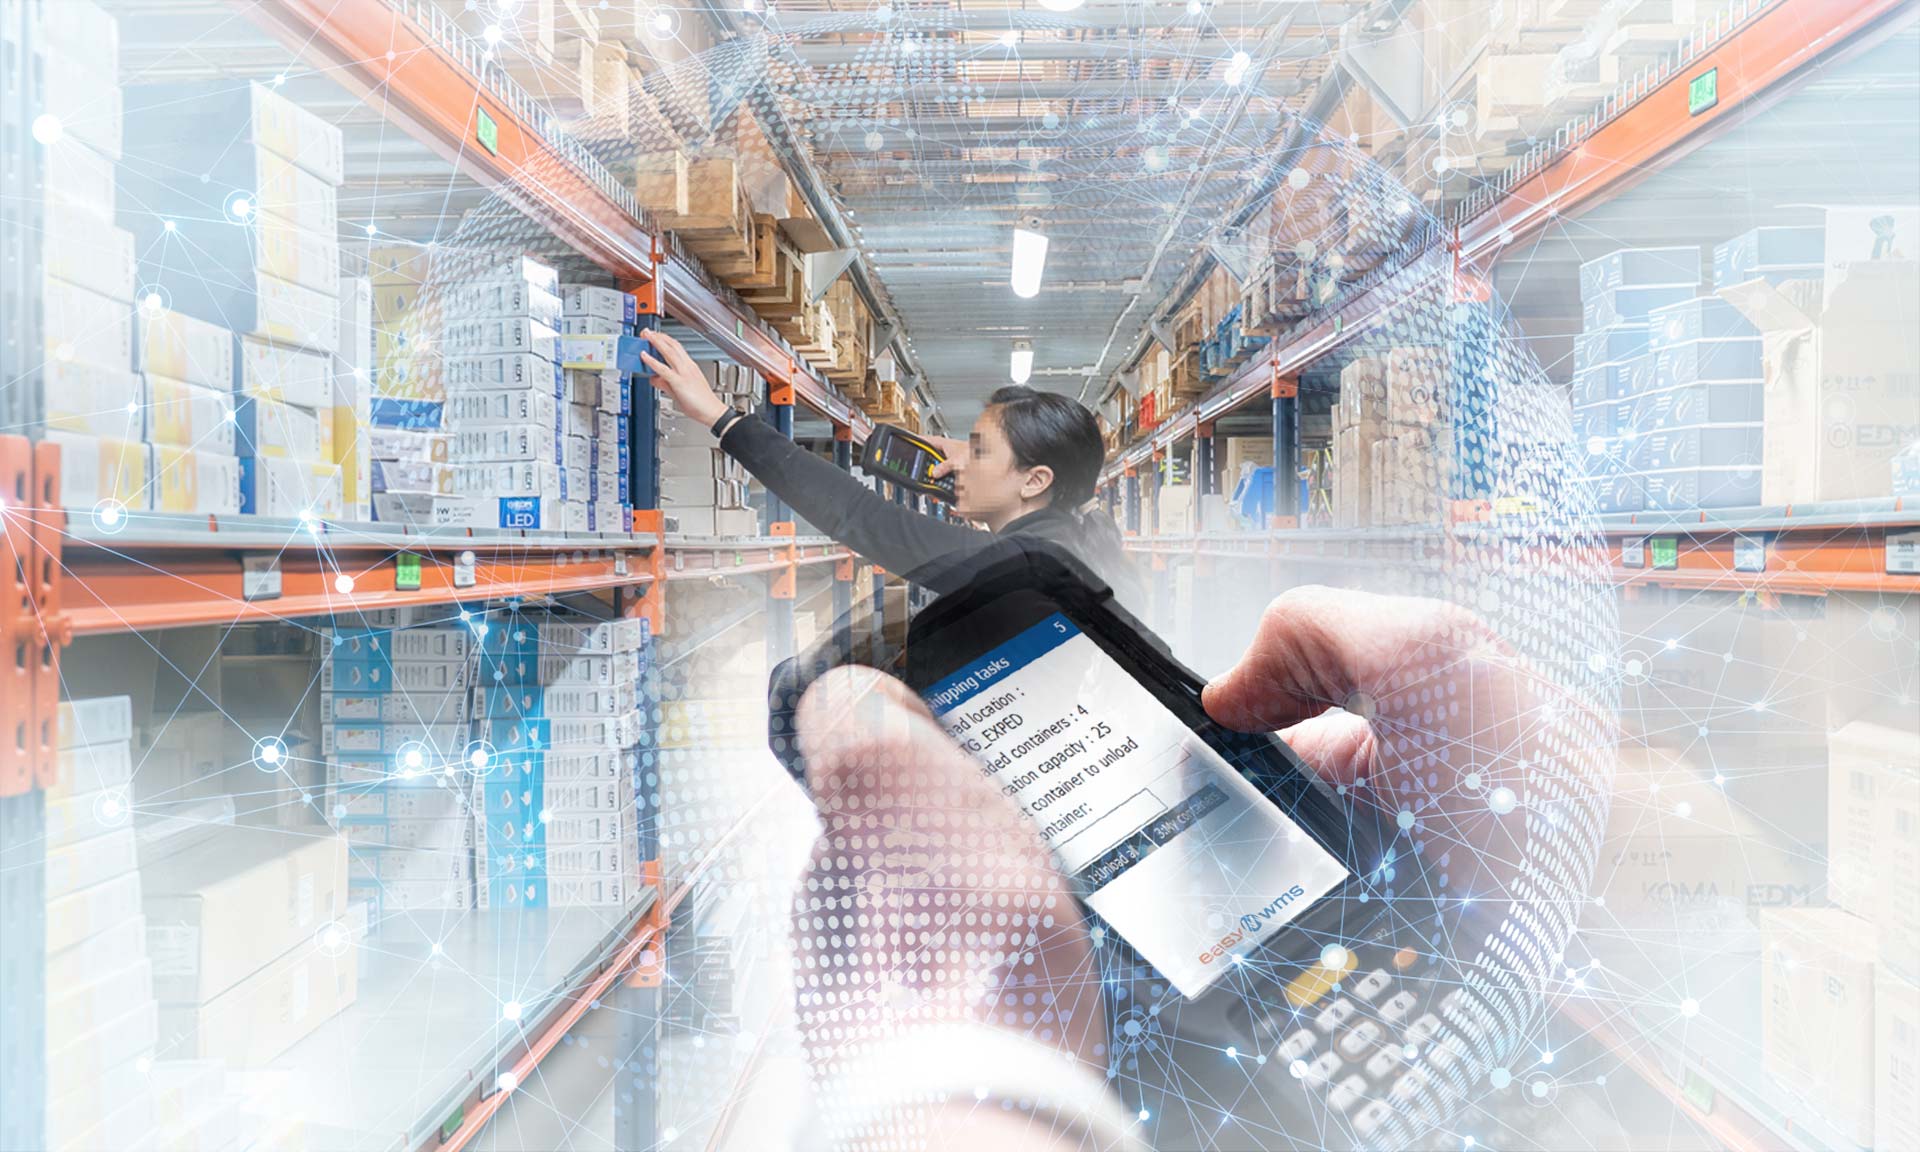 RF picking calls for the use of RF scanners and warehouse management software